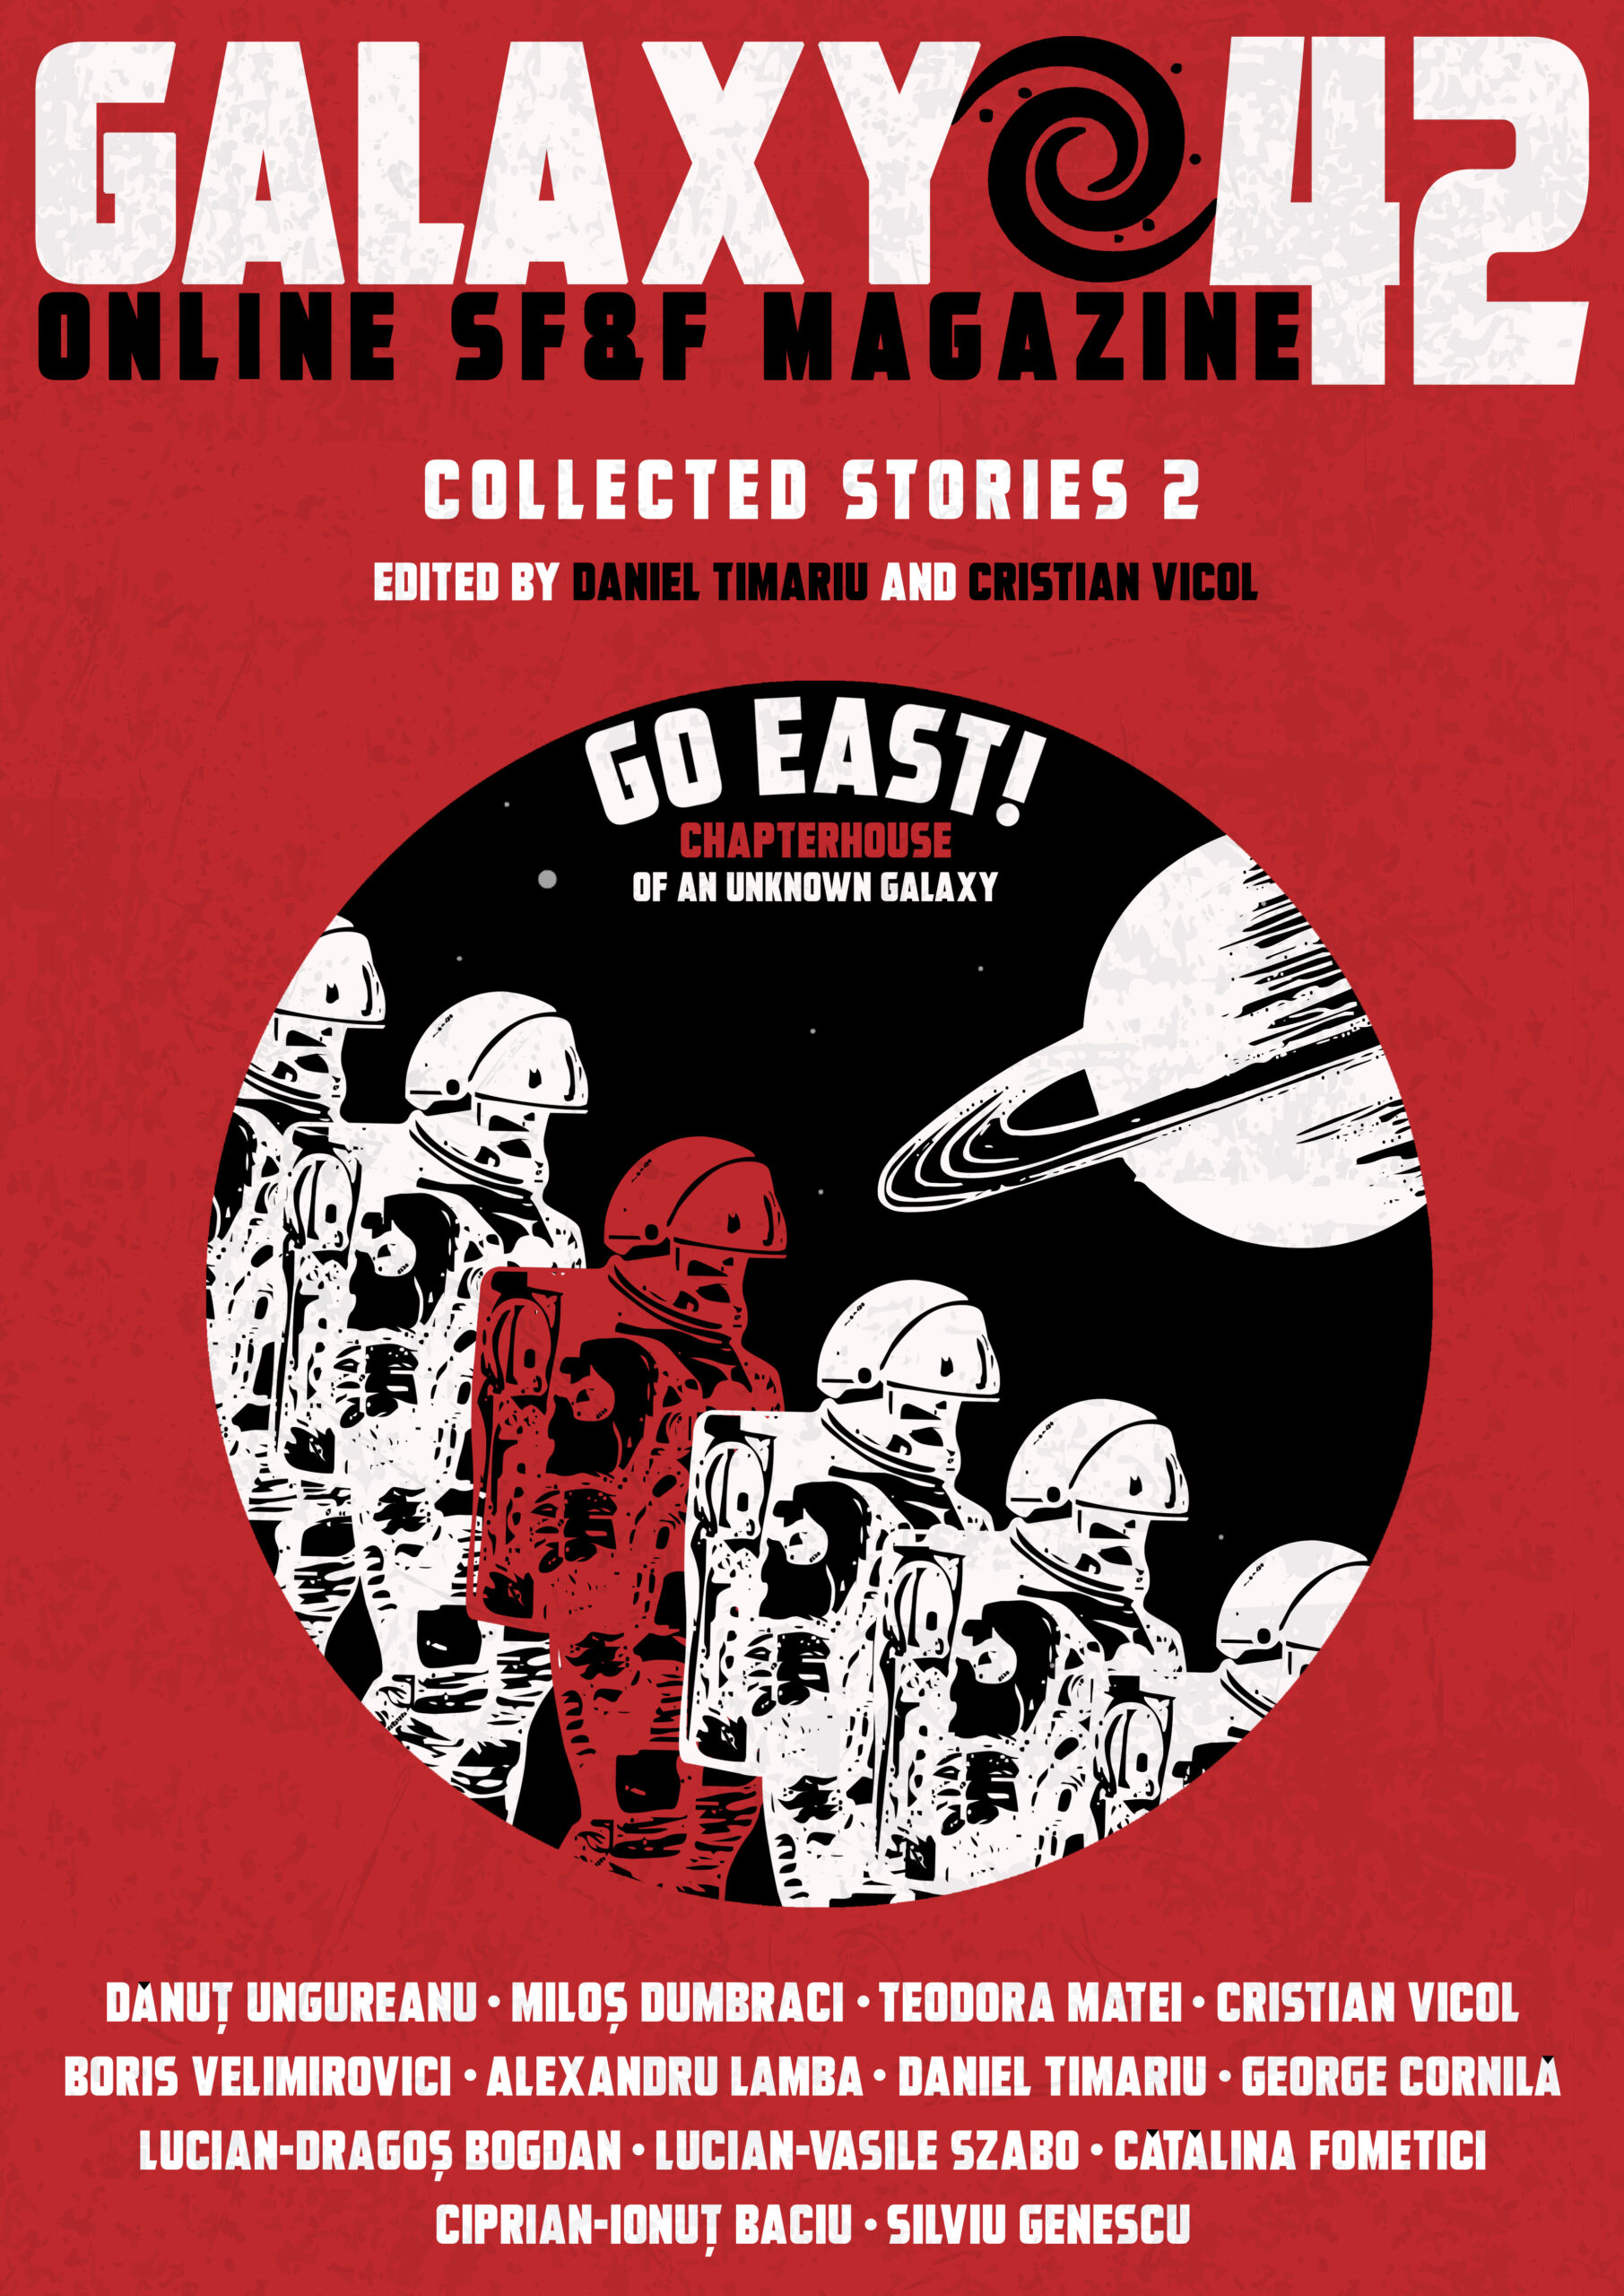 Collected Stories from the Galaxy 42 online magazine – Eurocon 2020 Edition